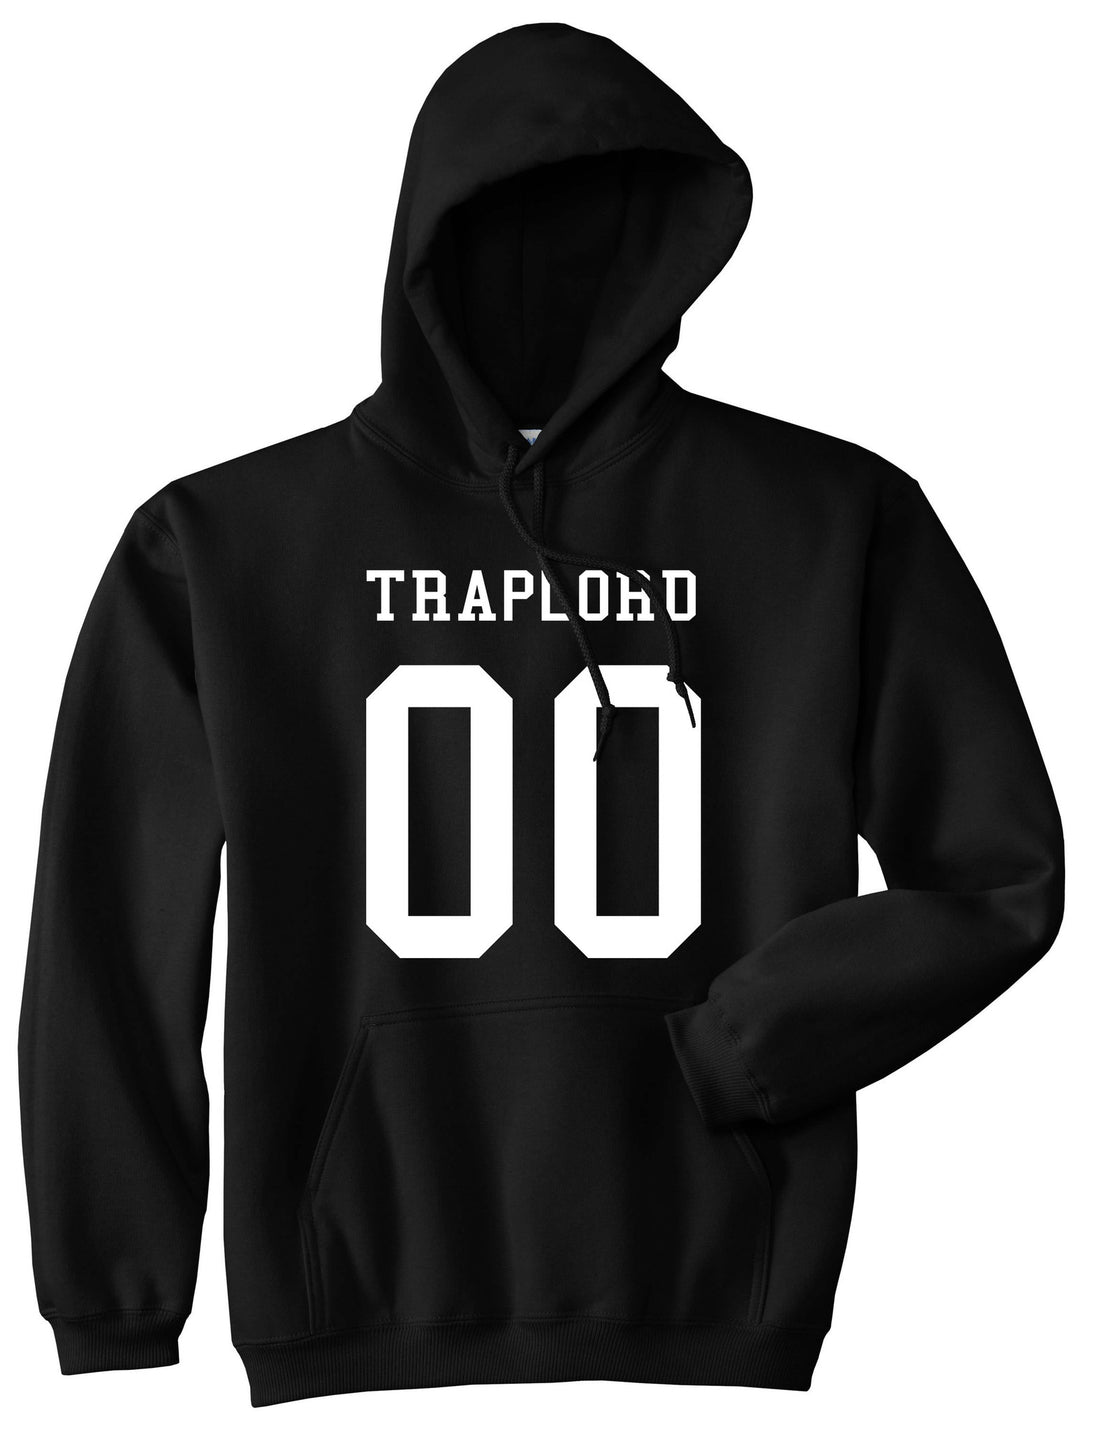 Traplord Team Jersey 00 Trap Lord Pullover Hoodie in Black By Kings Of NY